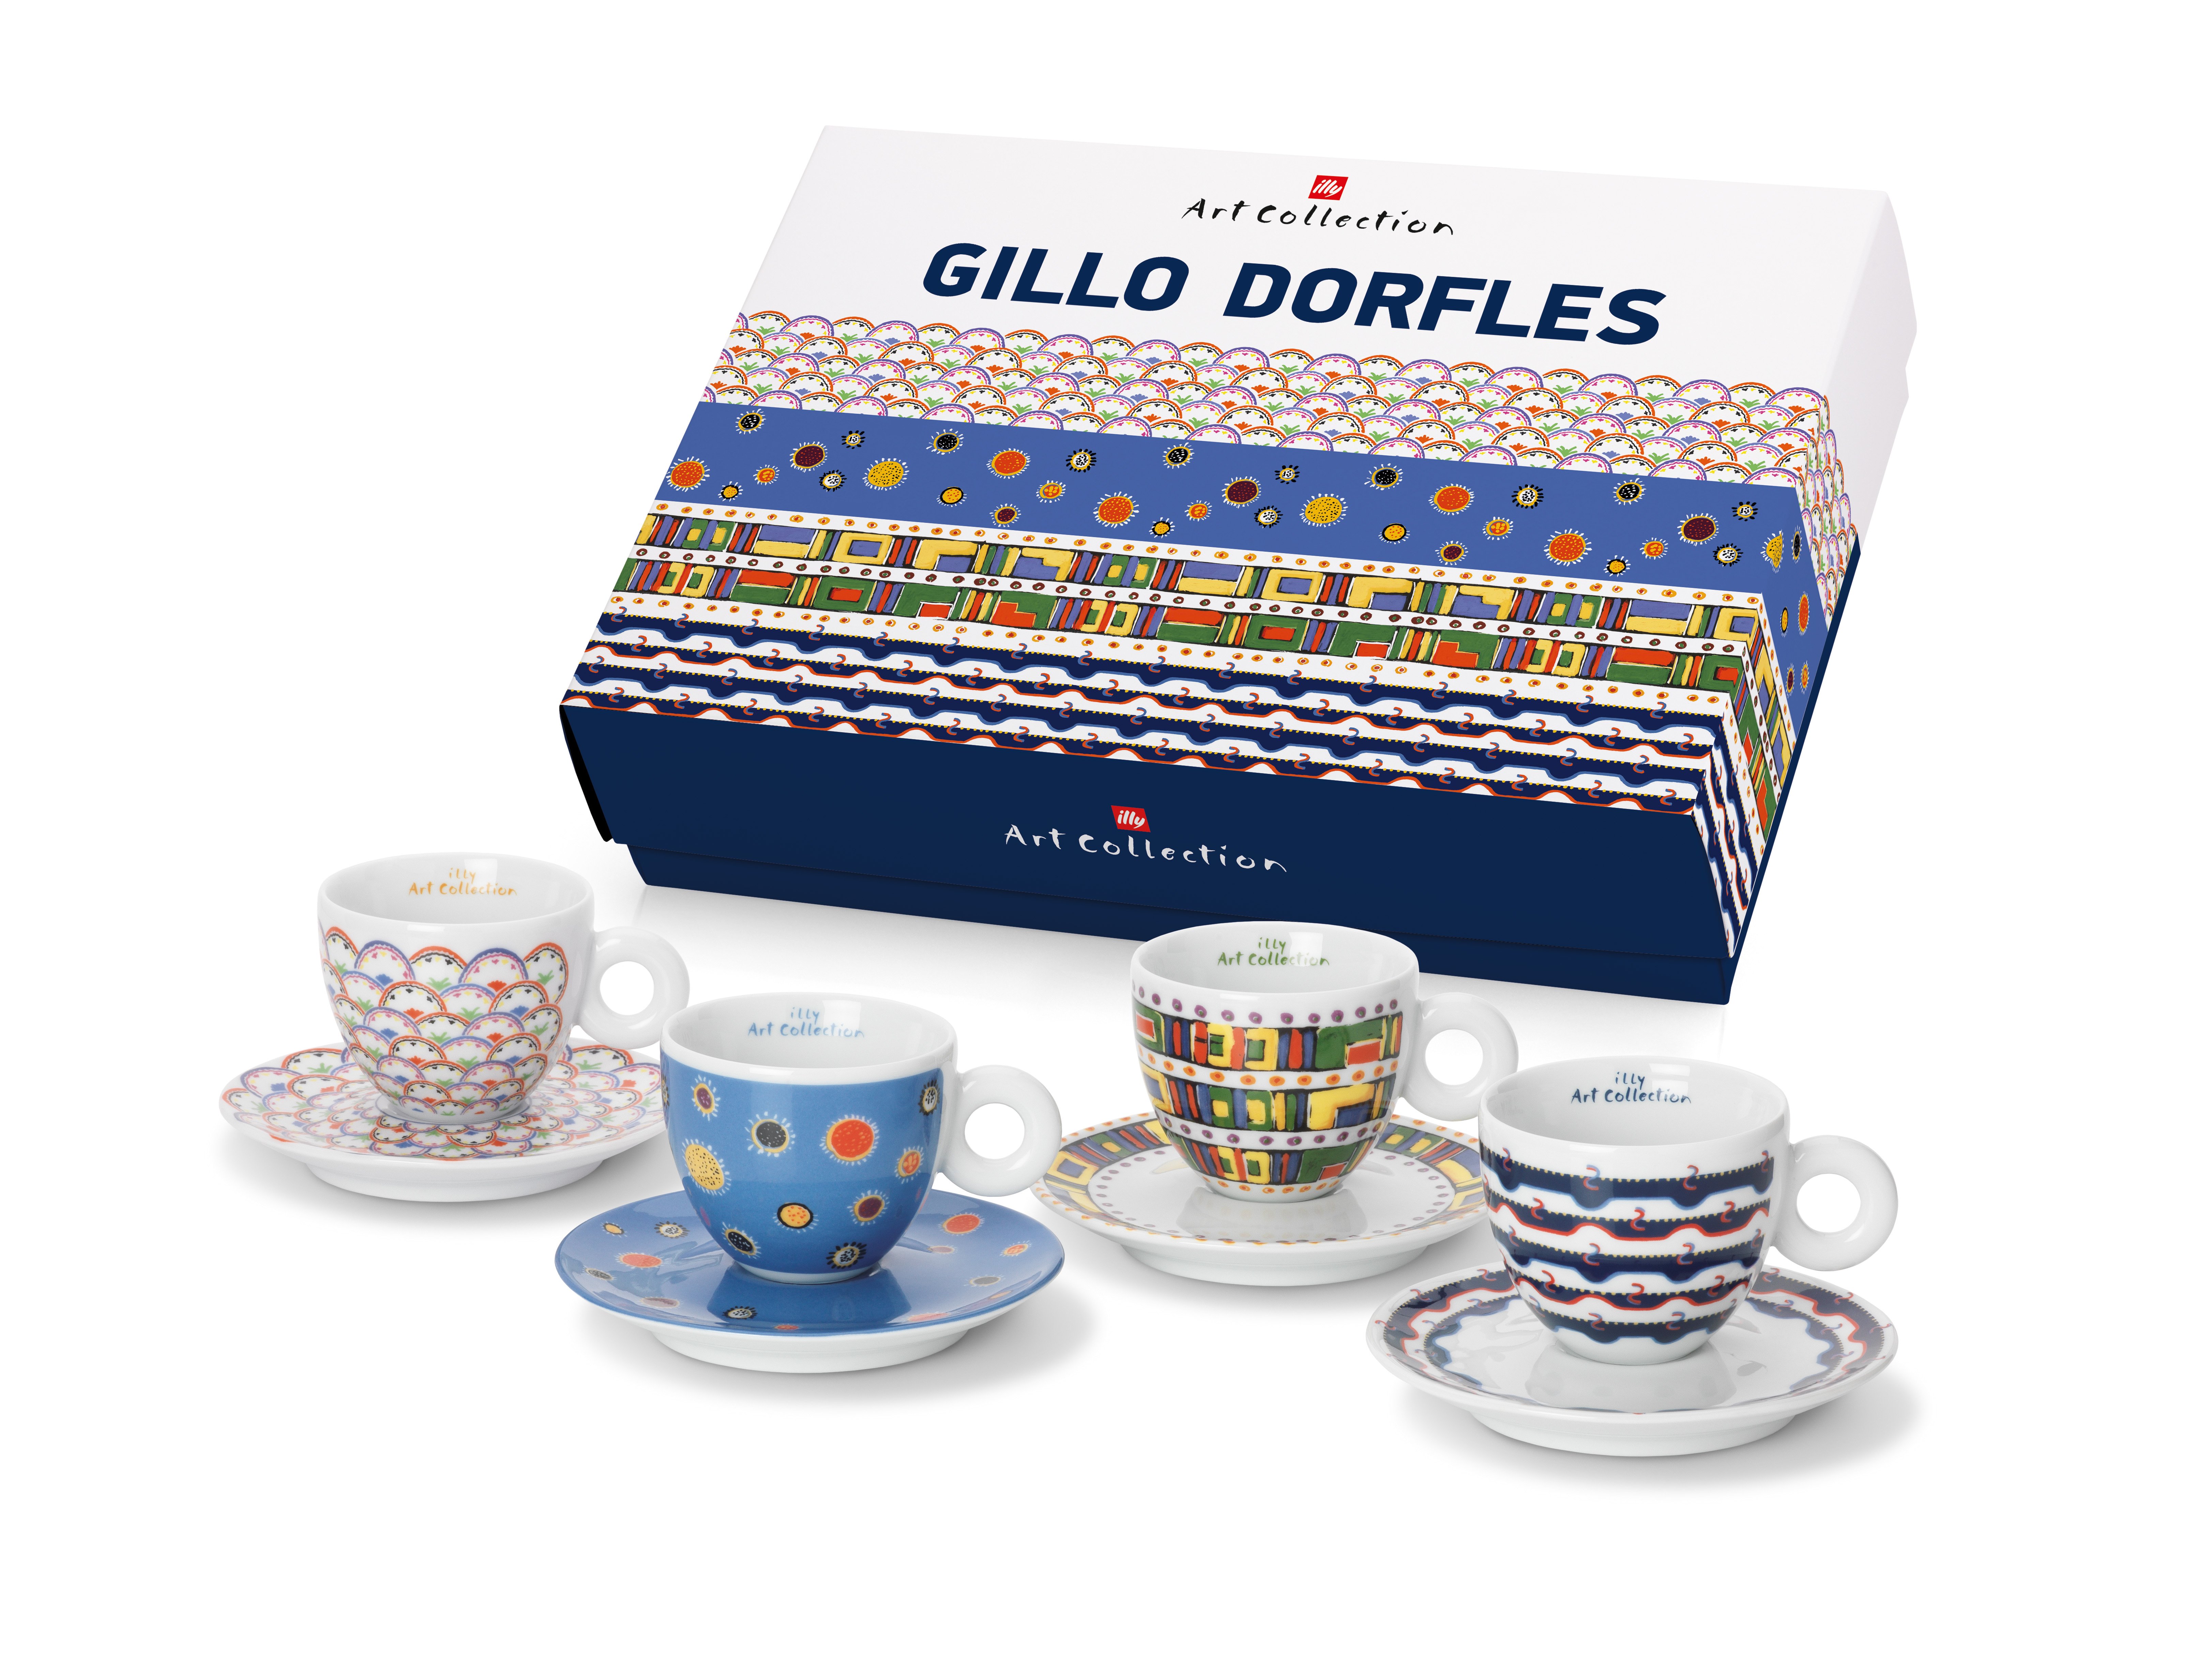 illy Art Collection Gillo Dorfles - Set of 4 Cappuccino Cups